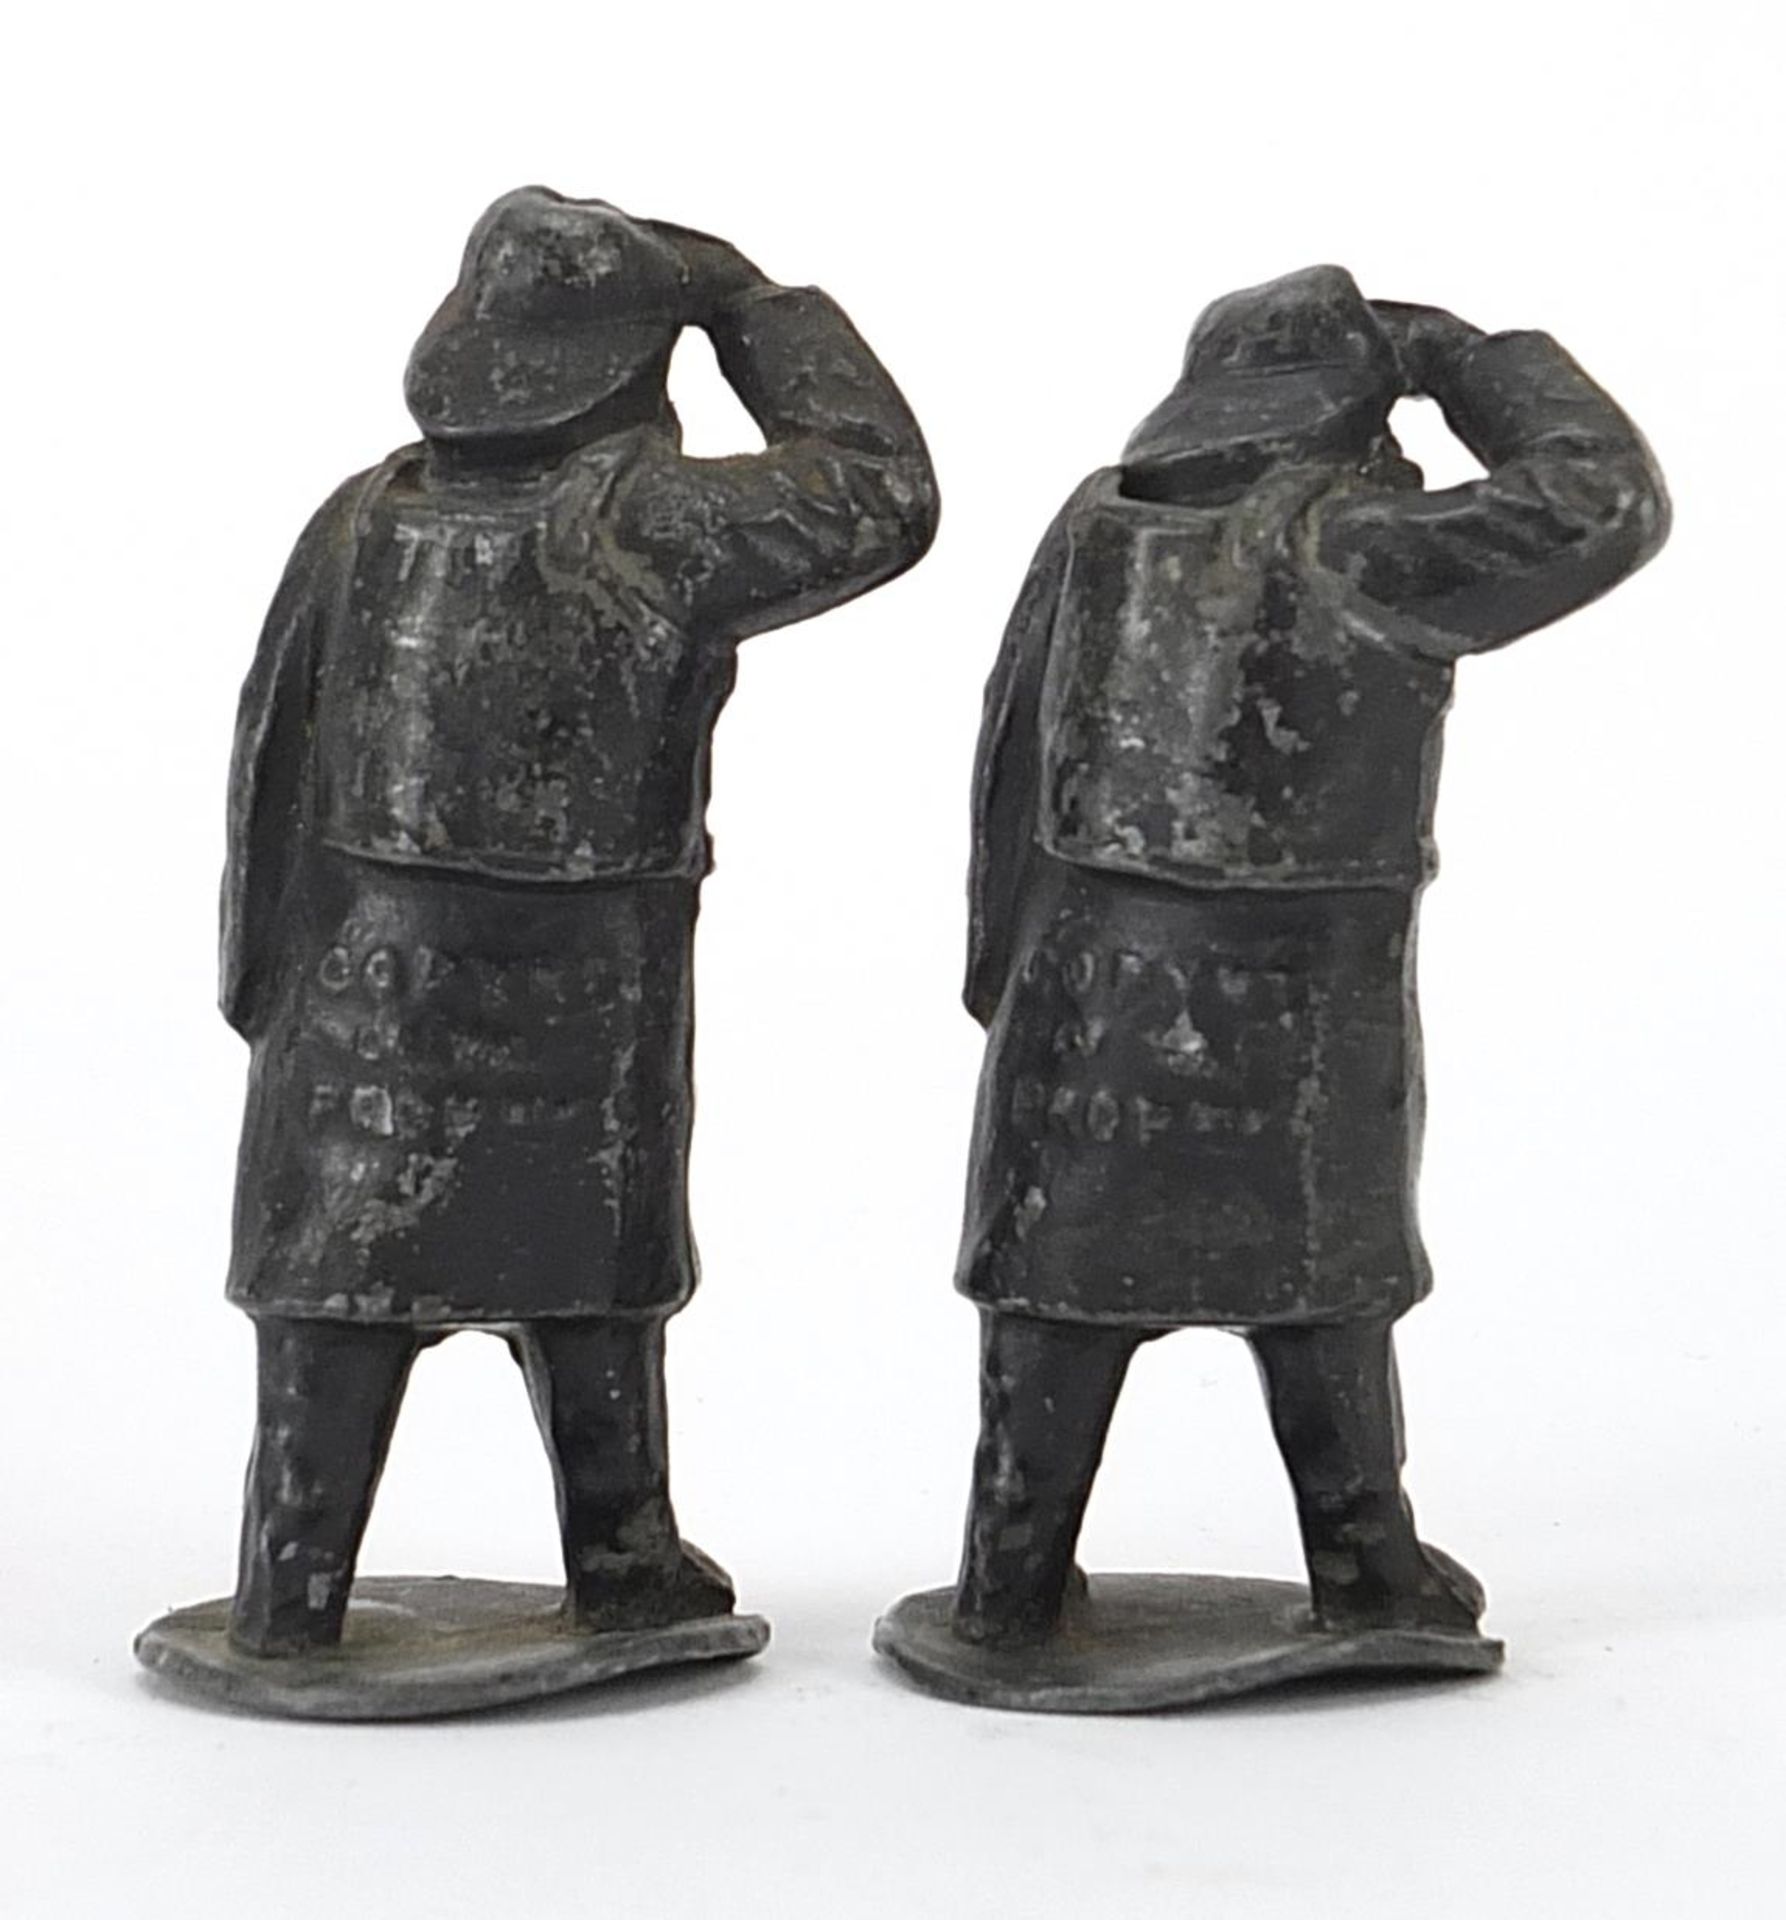 Two lead lifeboat figures, 6.5cm high - Image 2 of 3